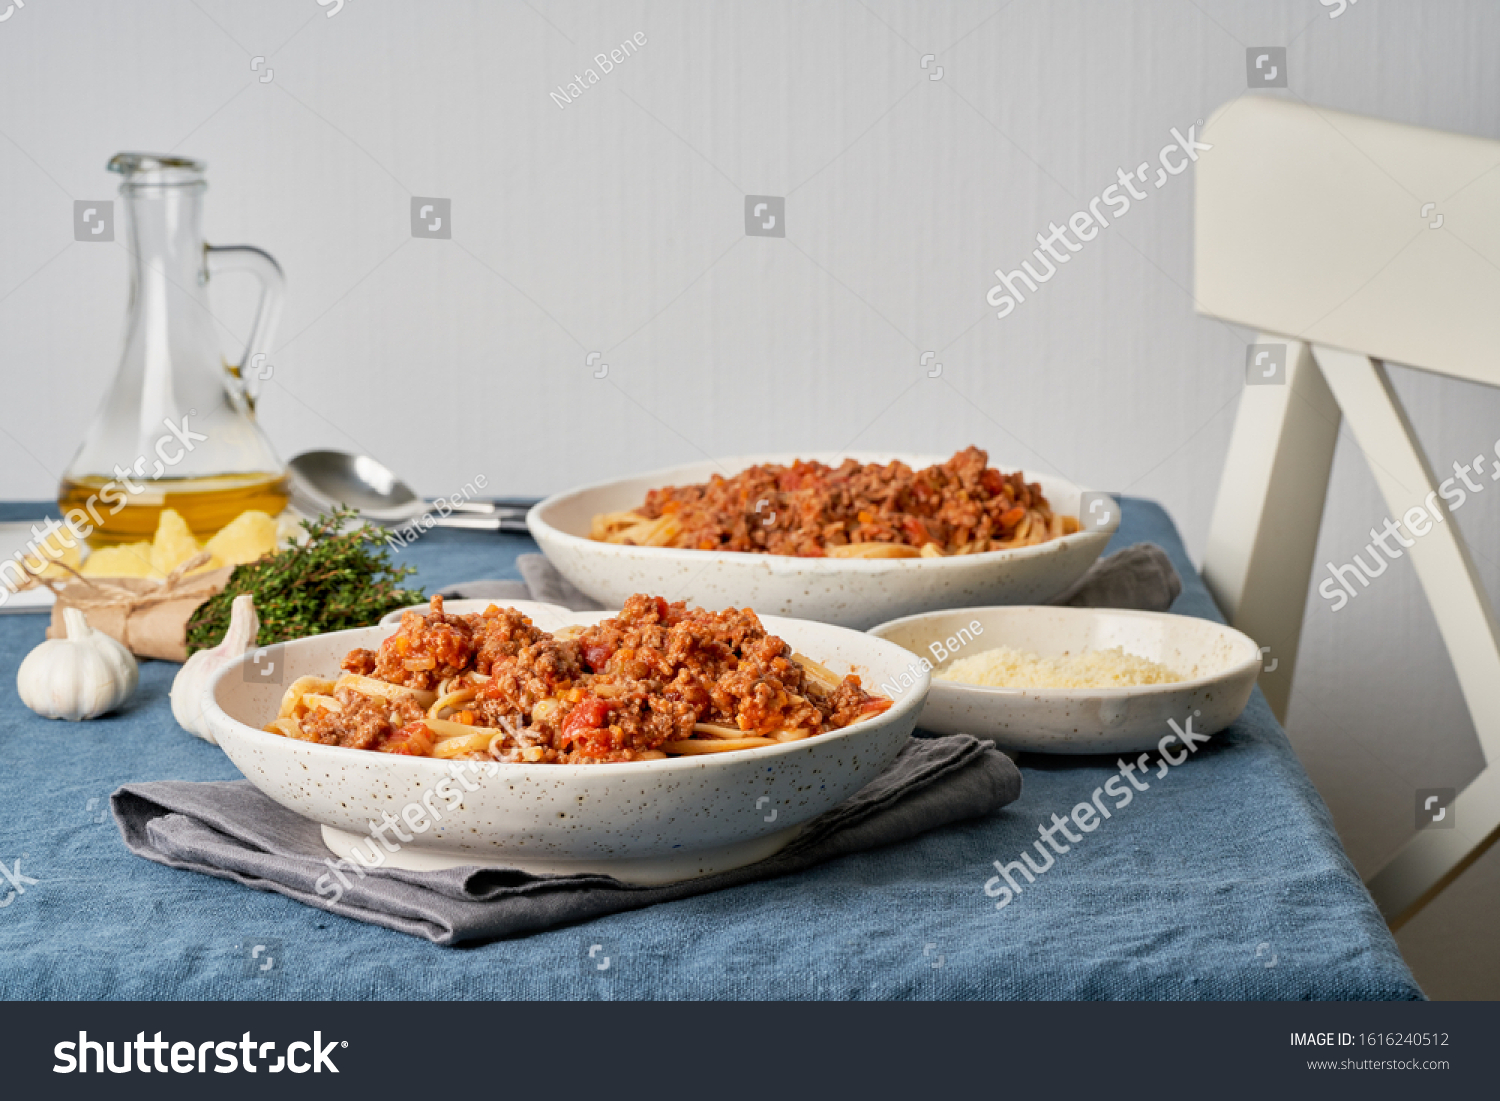 Pasta Bolognese Linguine with mincemeat and tomatoes. Italian dinner for two at the table, dark blue tablecloth, chair, homeliness. Side view #1616240512